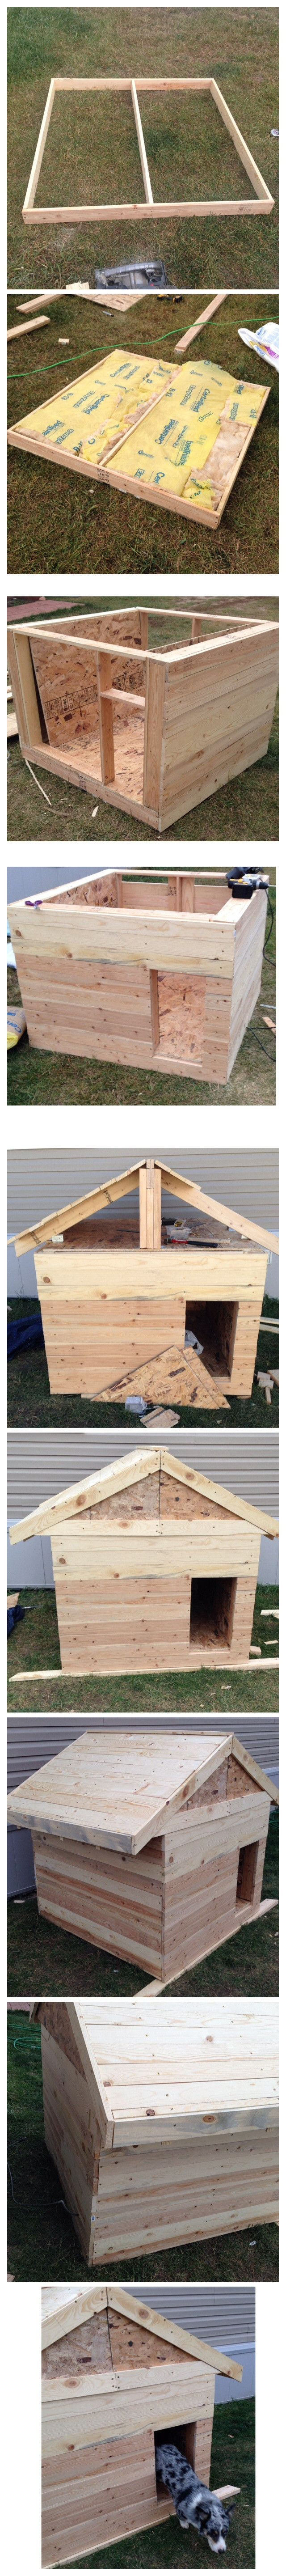 Building a heated and insulated dog house with min...